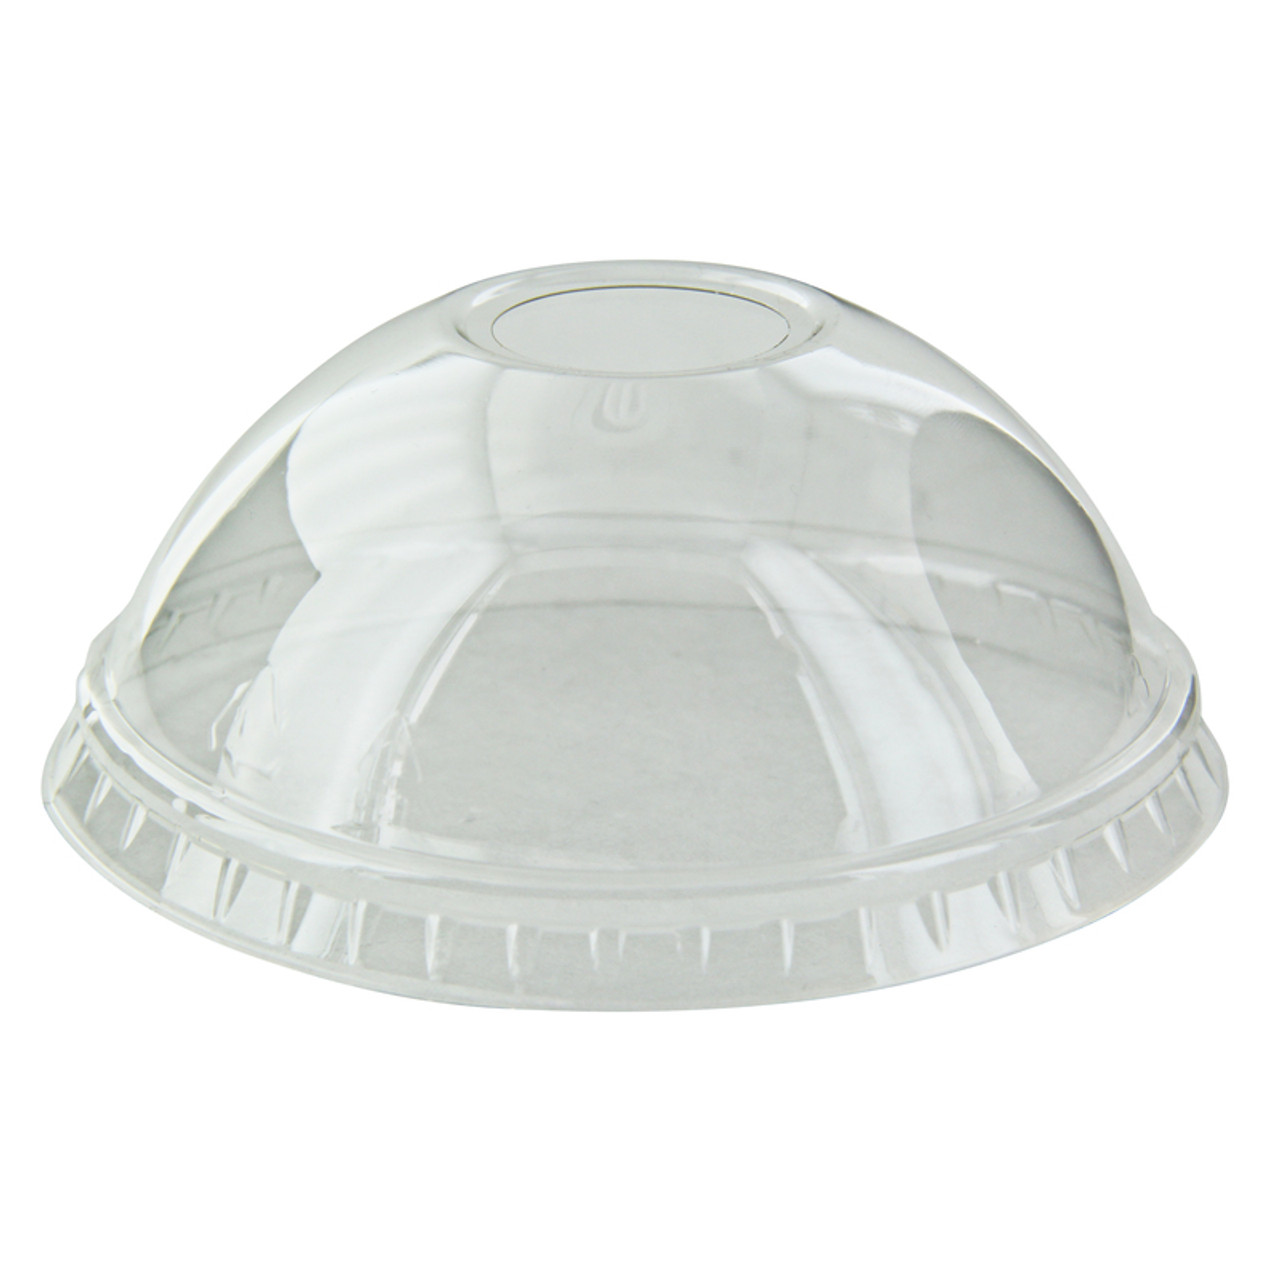 210GKL90DX Clear PET Dome Lid With Hole for 210POC181N & 210POB181 & 210POC320N & 210GPU12 D:3.5in - 100 pcs